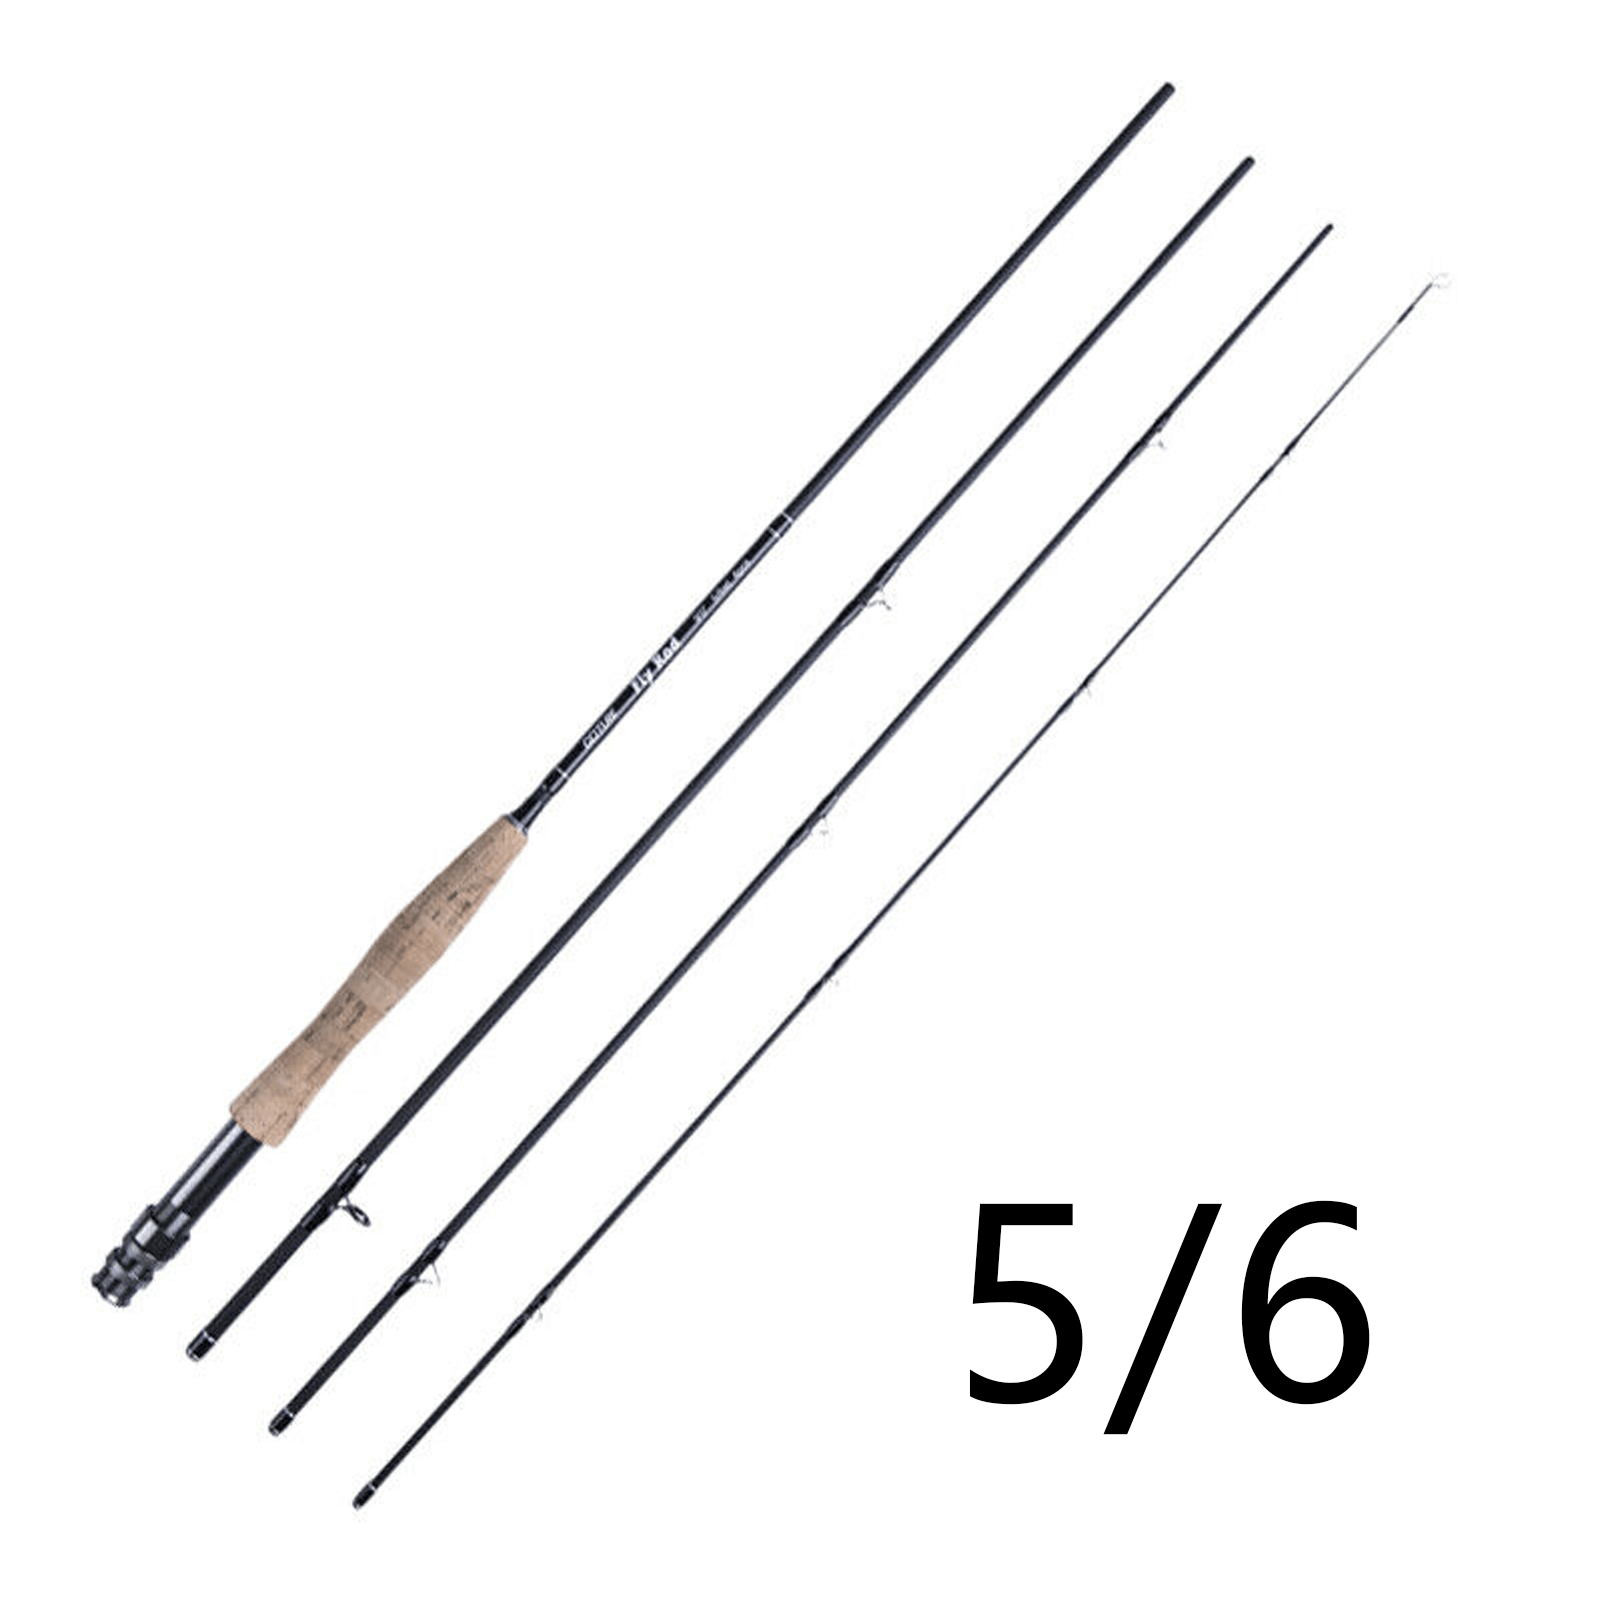 4pcs * 9ft Fly Fishing Rod - Lightweight Carbon Fiber Rod for Trout and Bass